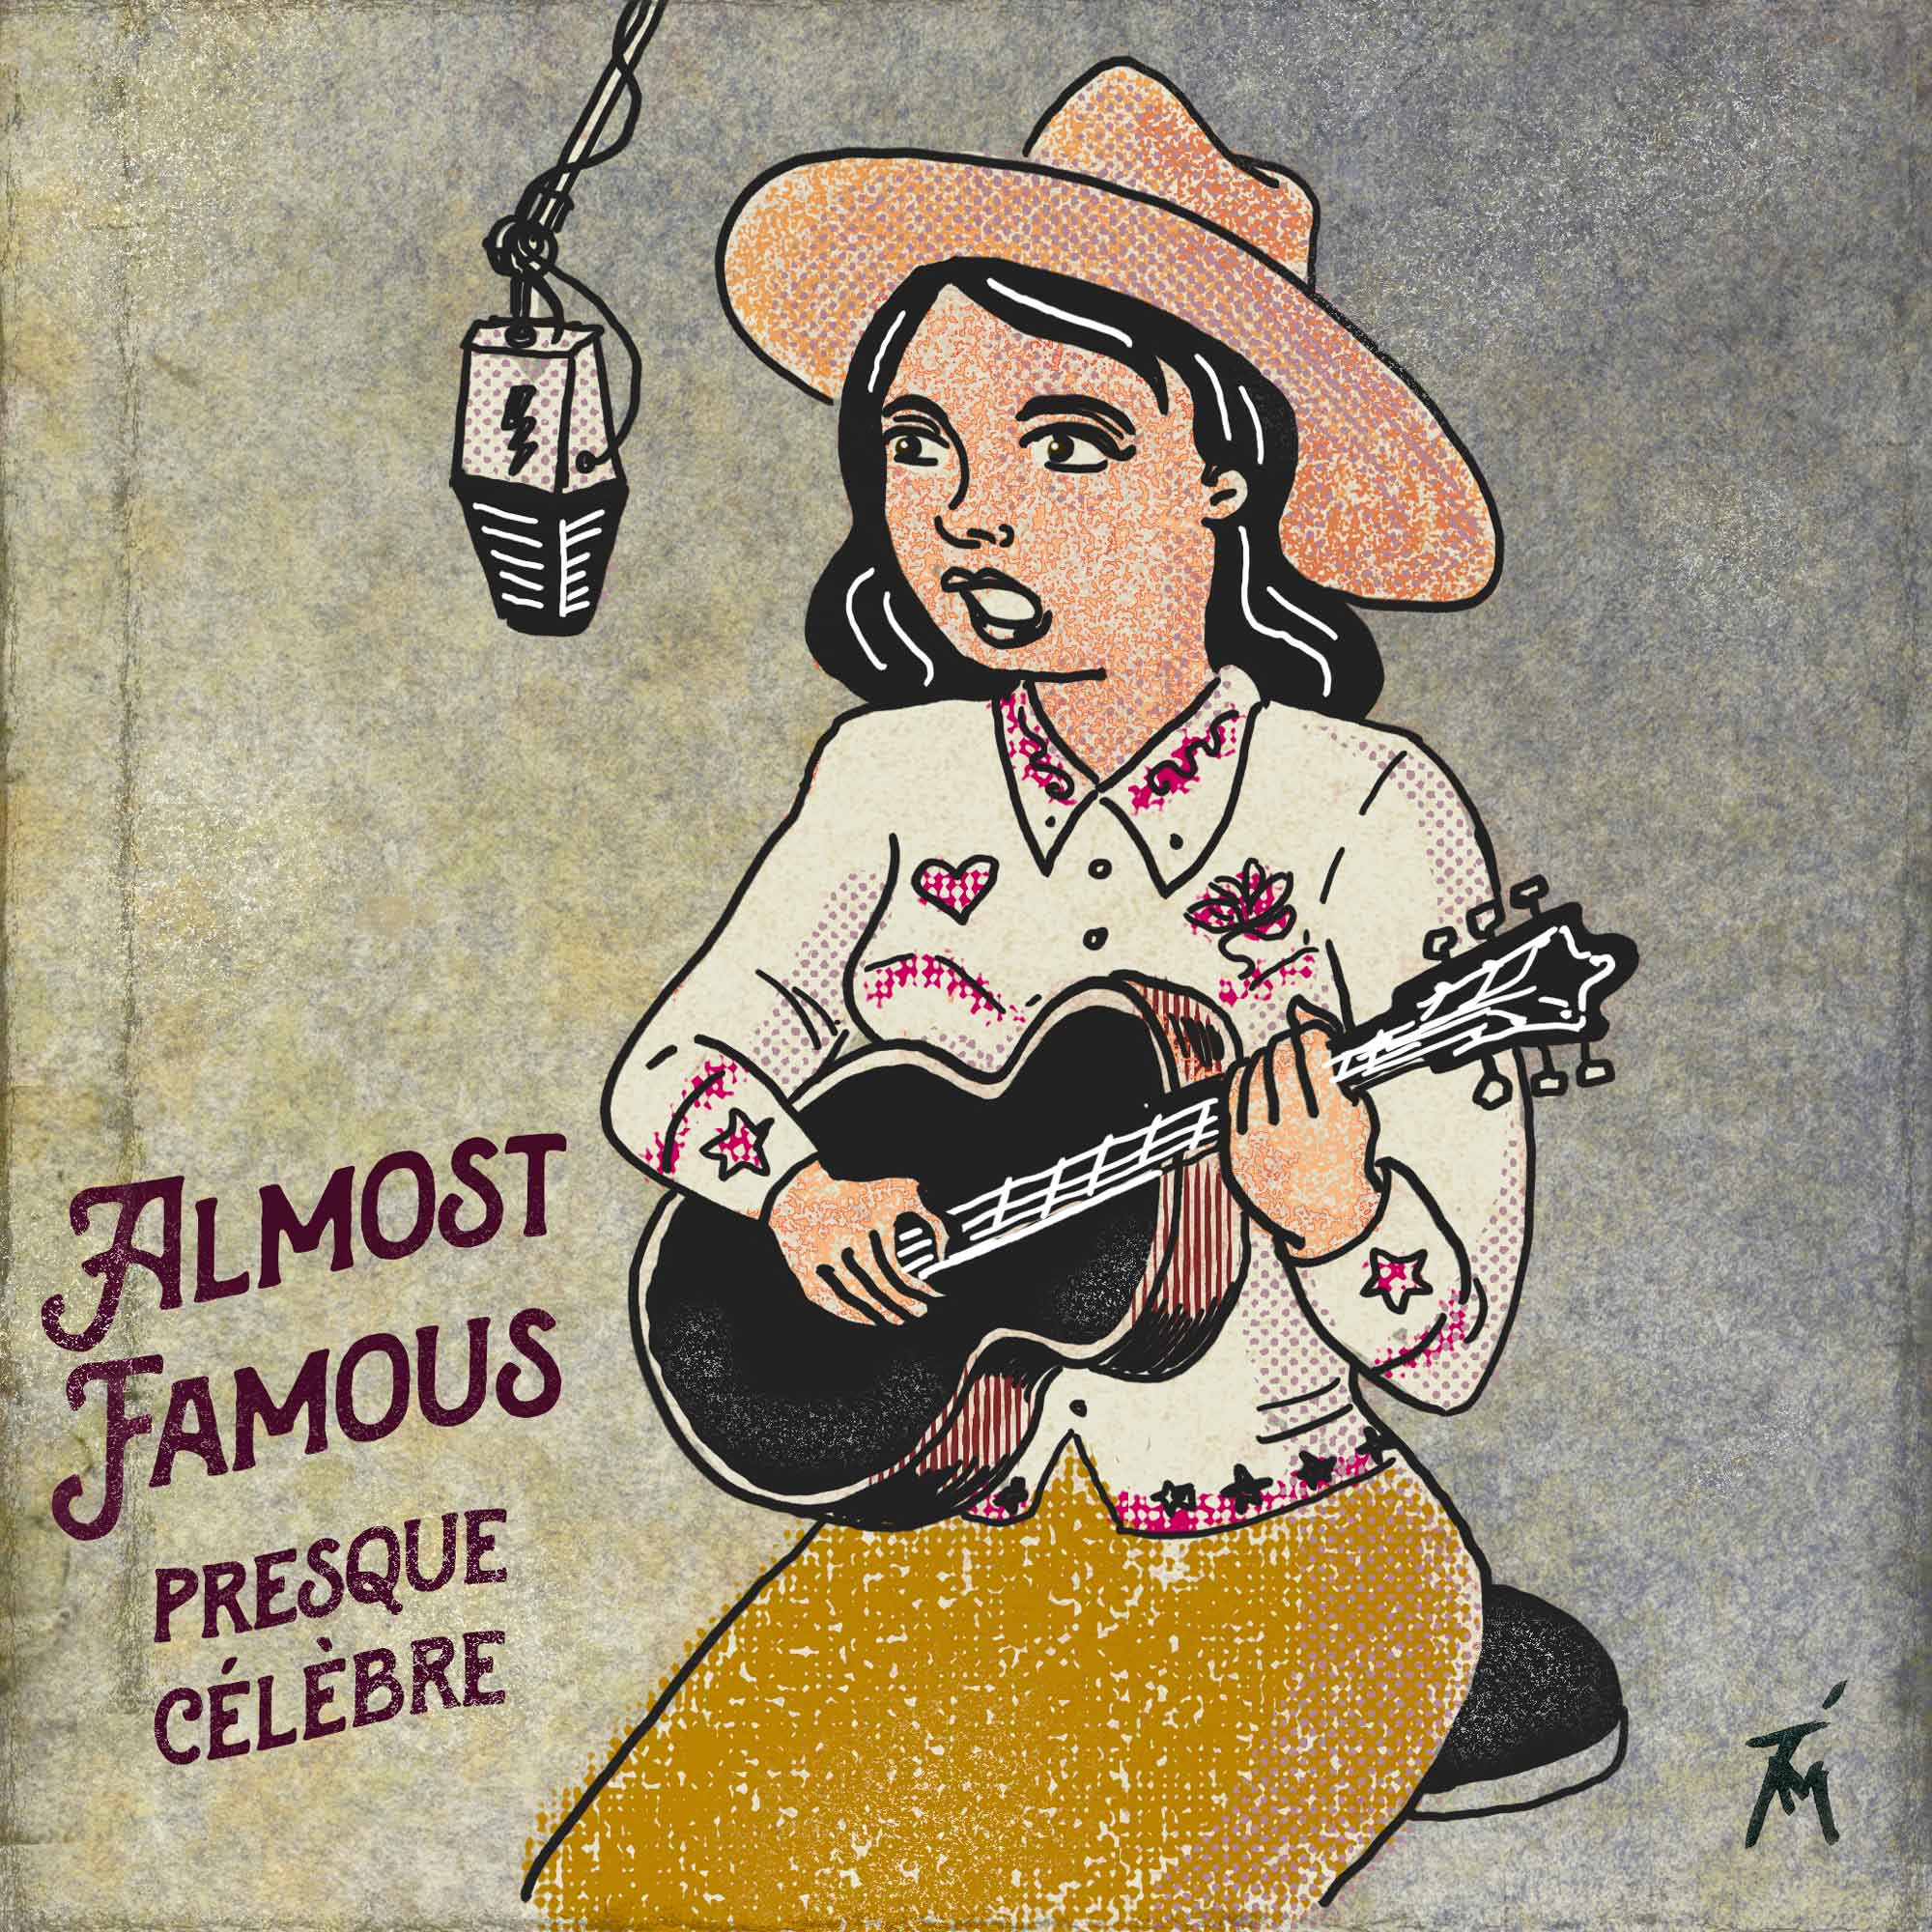 drawing of woman playing country music.